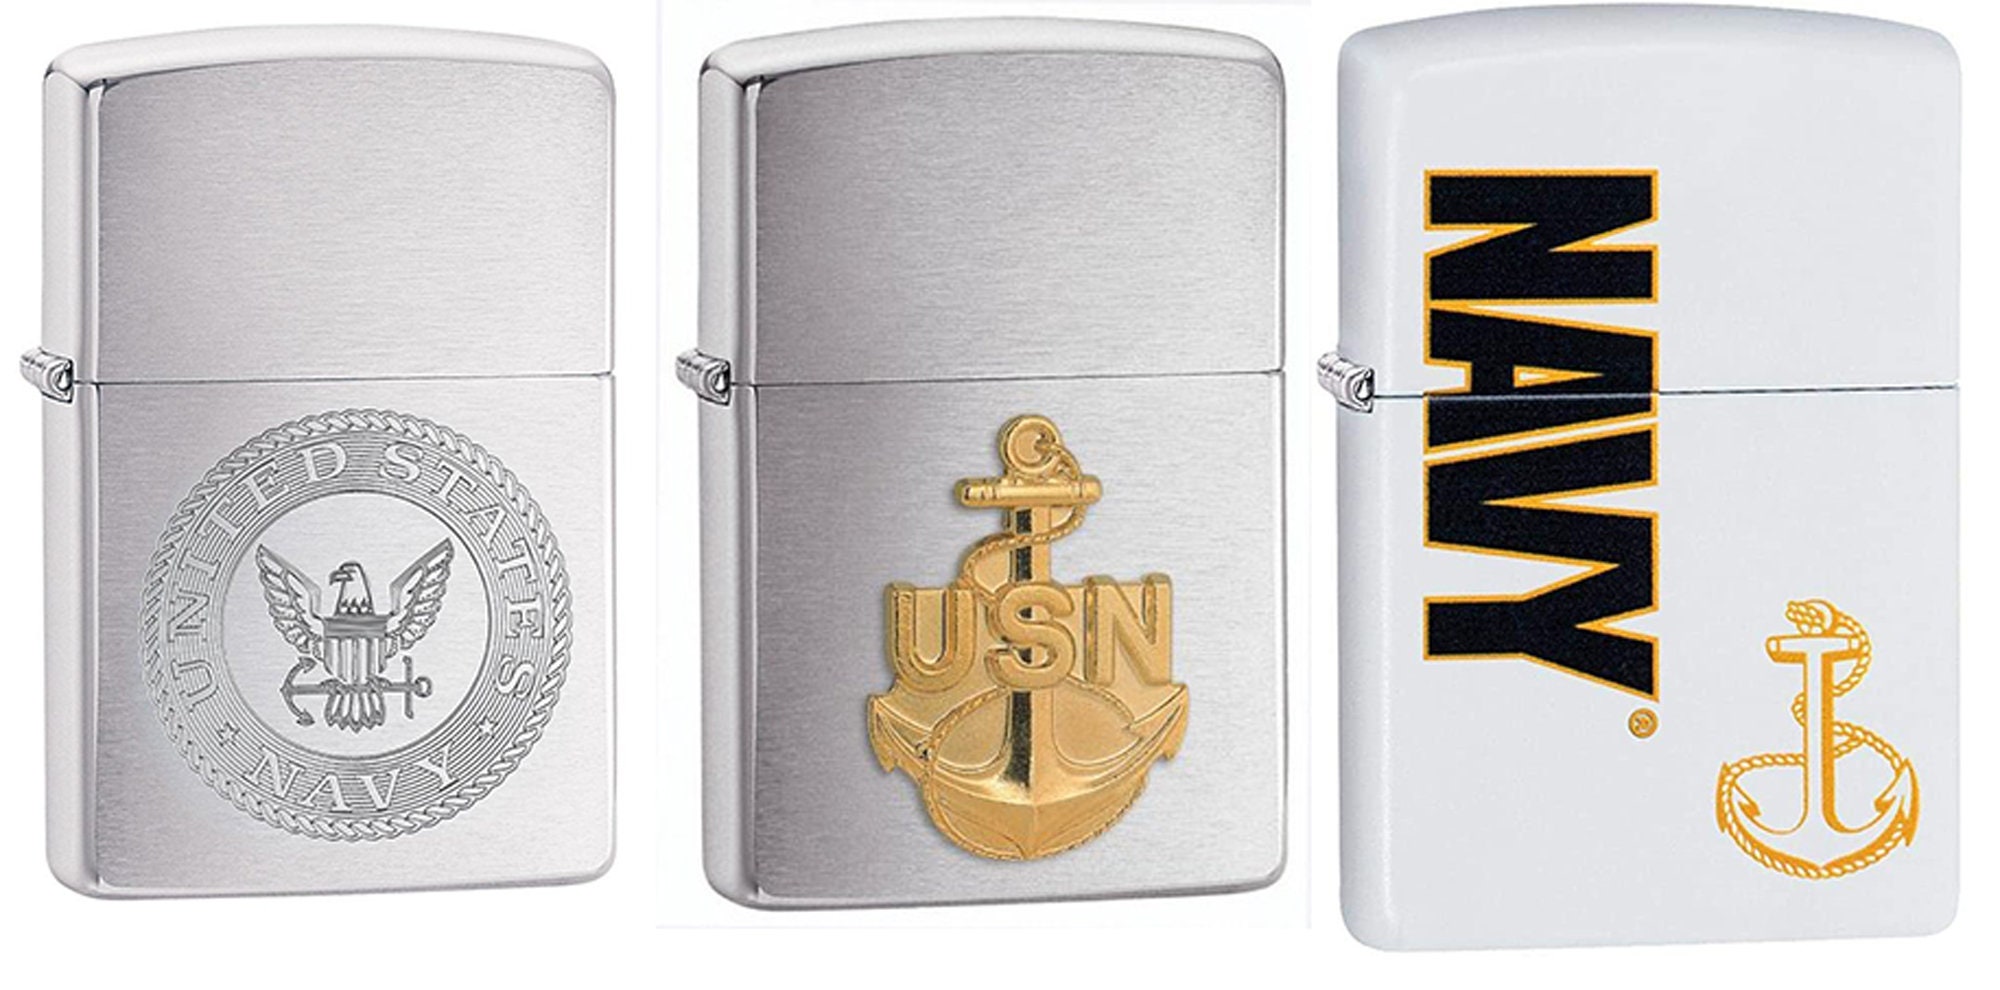 ZIPPO Lighter - WWII / Vintage US Navy Anchor